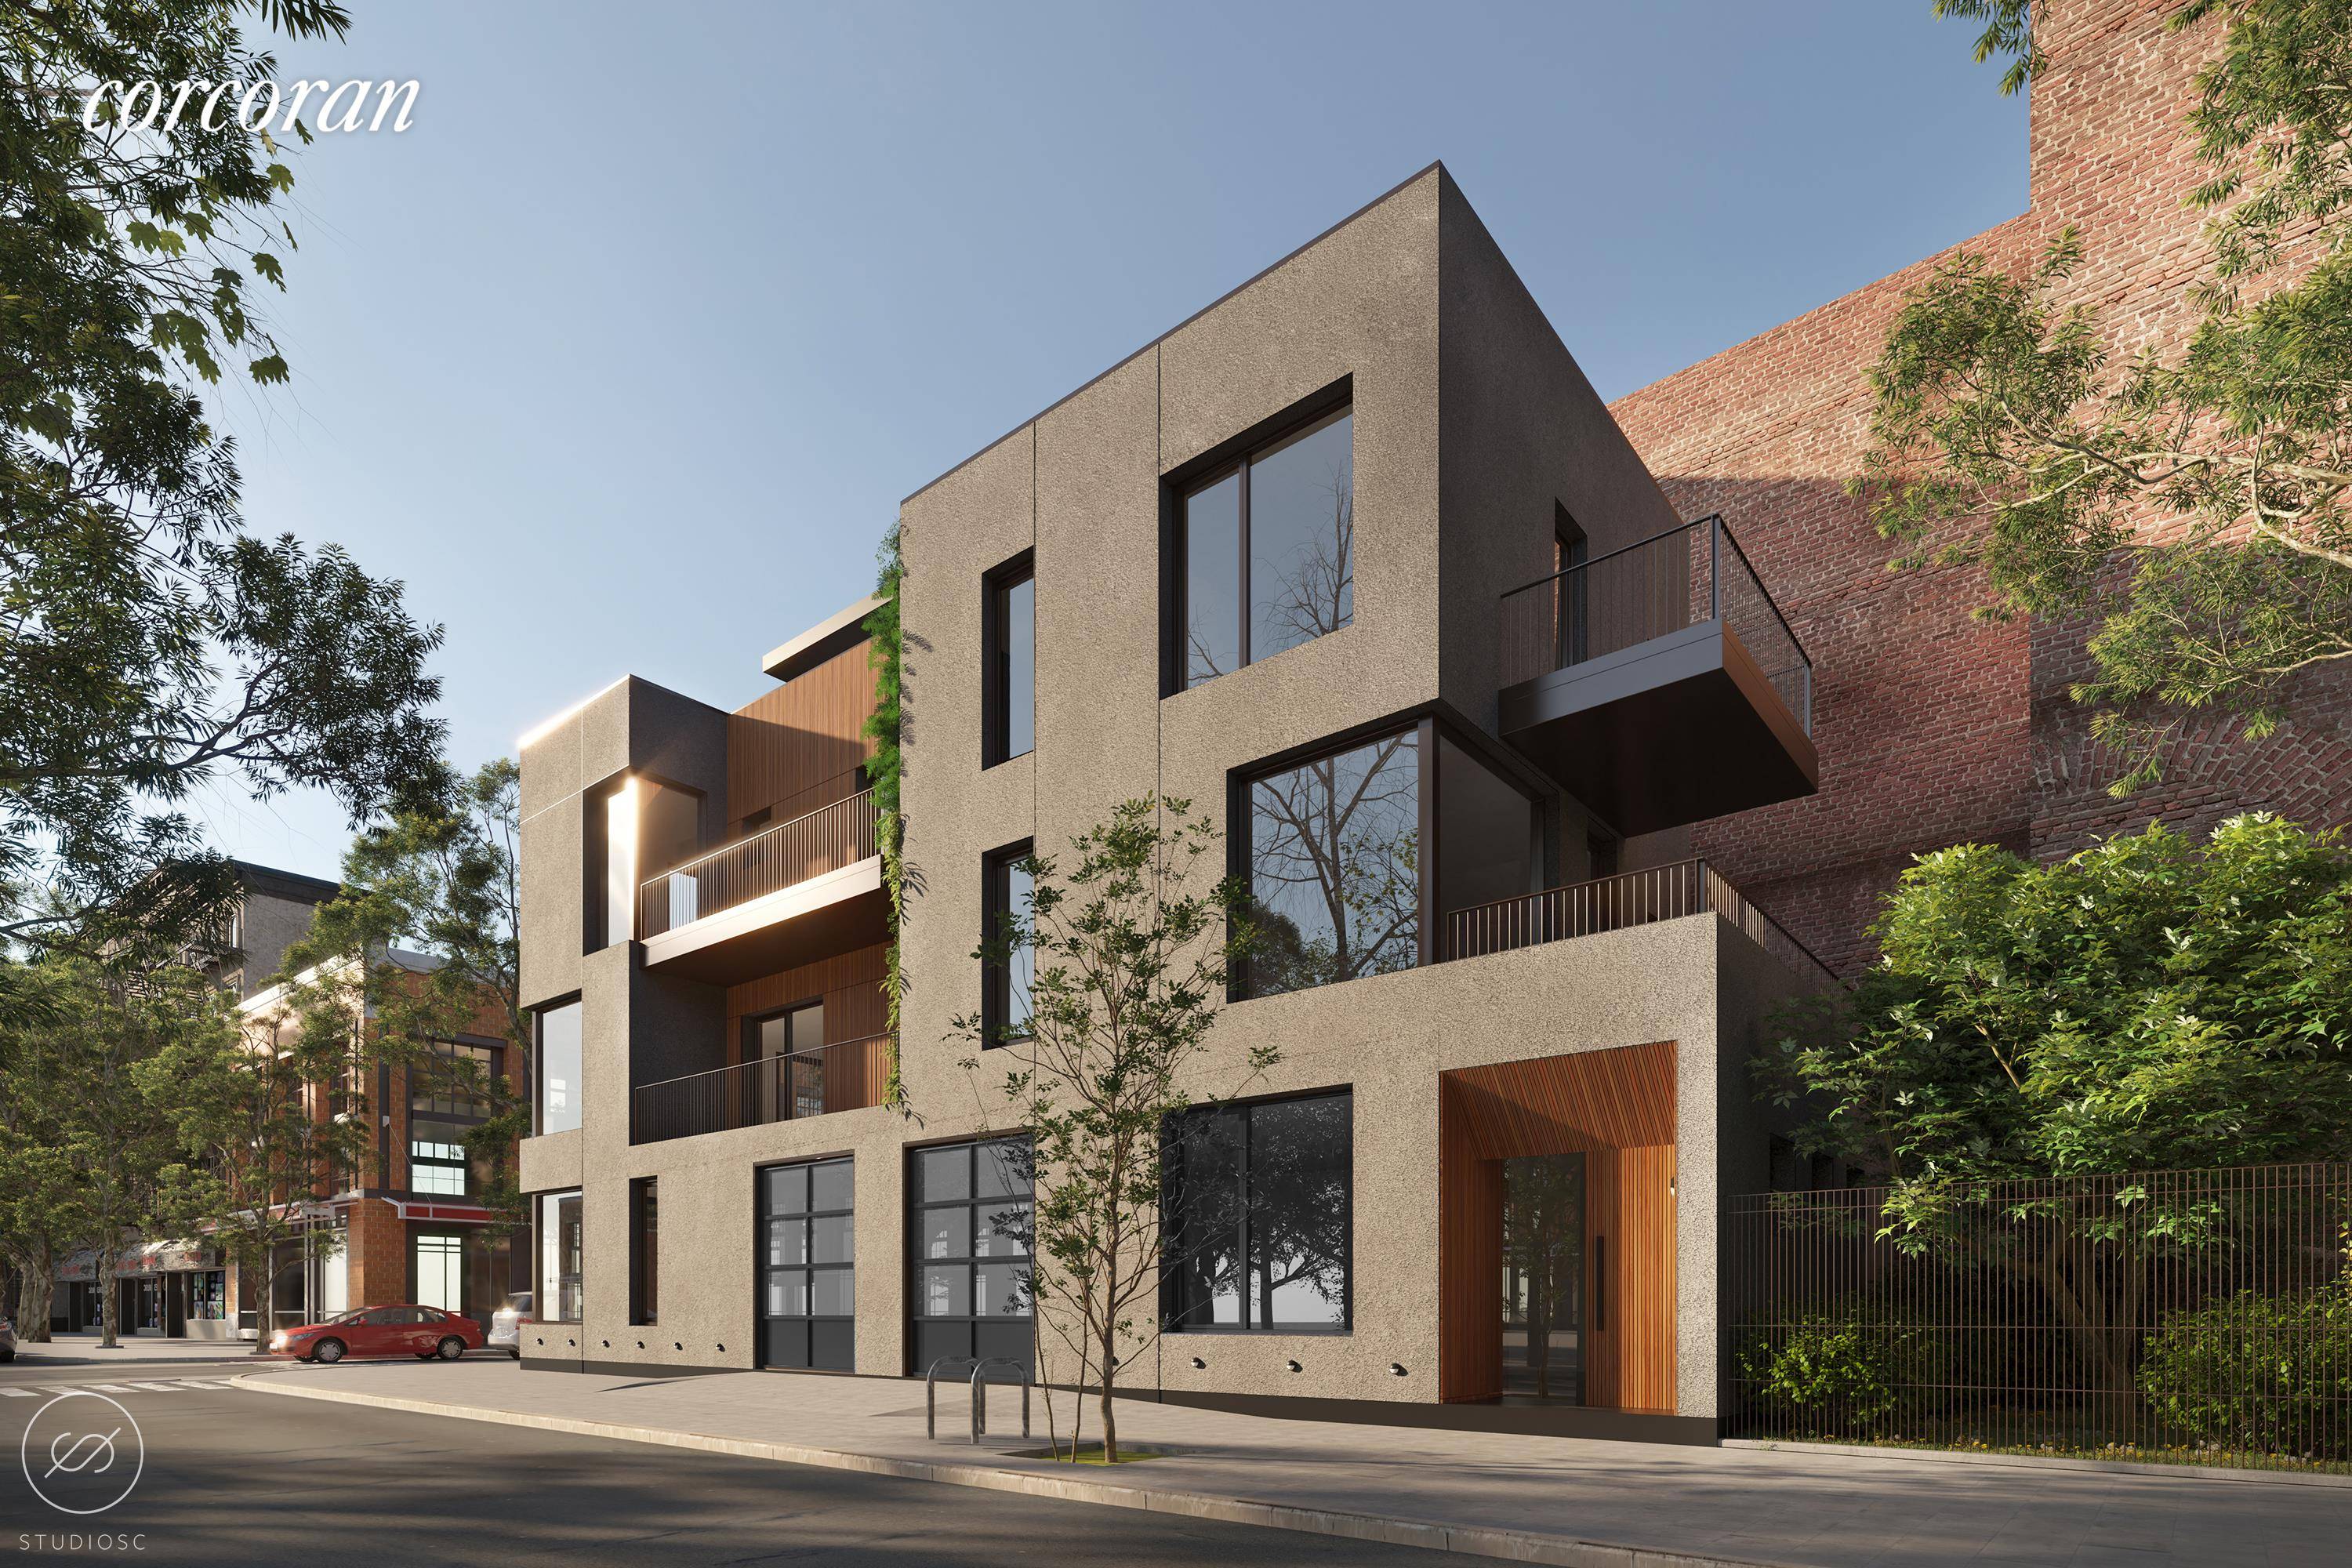 Introducing 382A Keap Street, a One of a Kind new development, single family townhouse in Williamsburg Brooklyn.